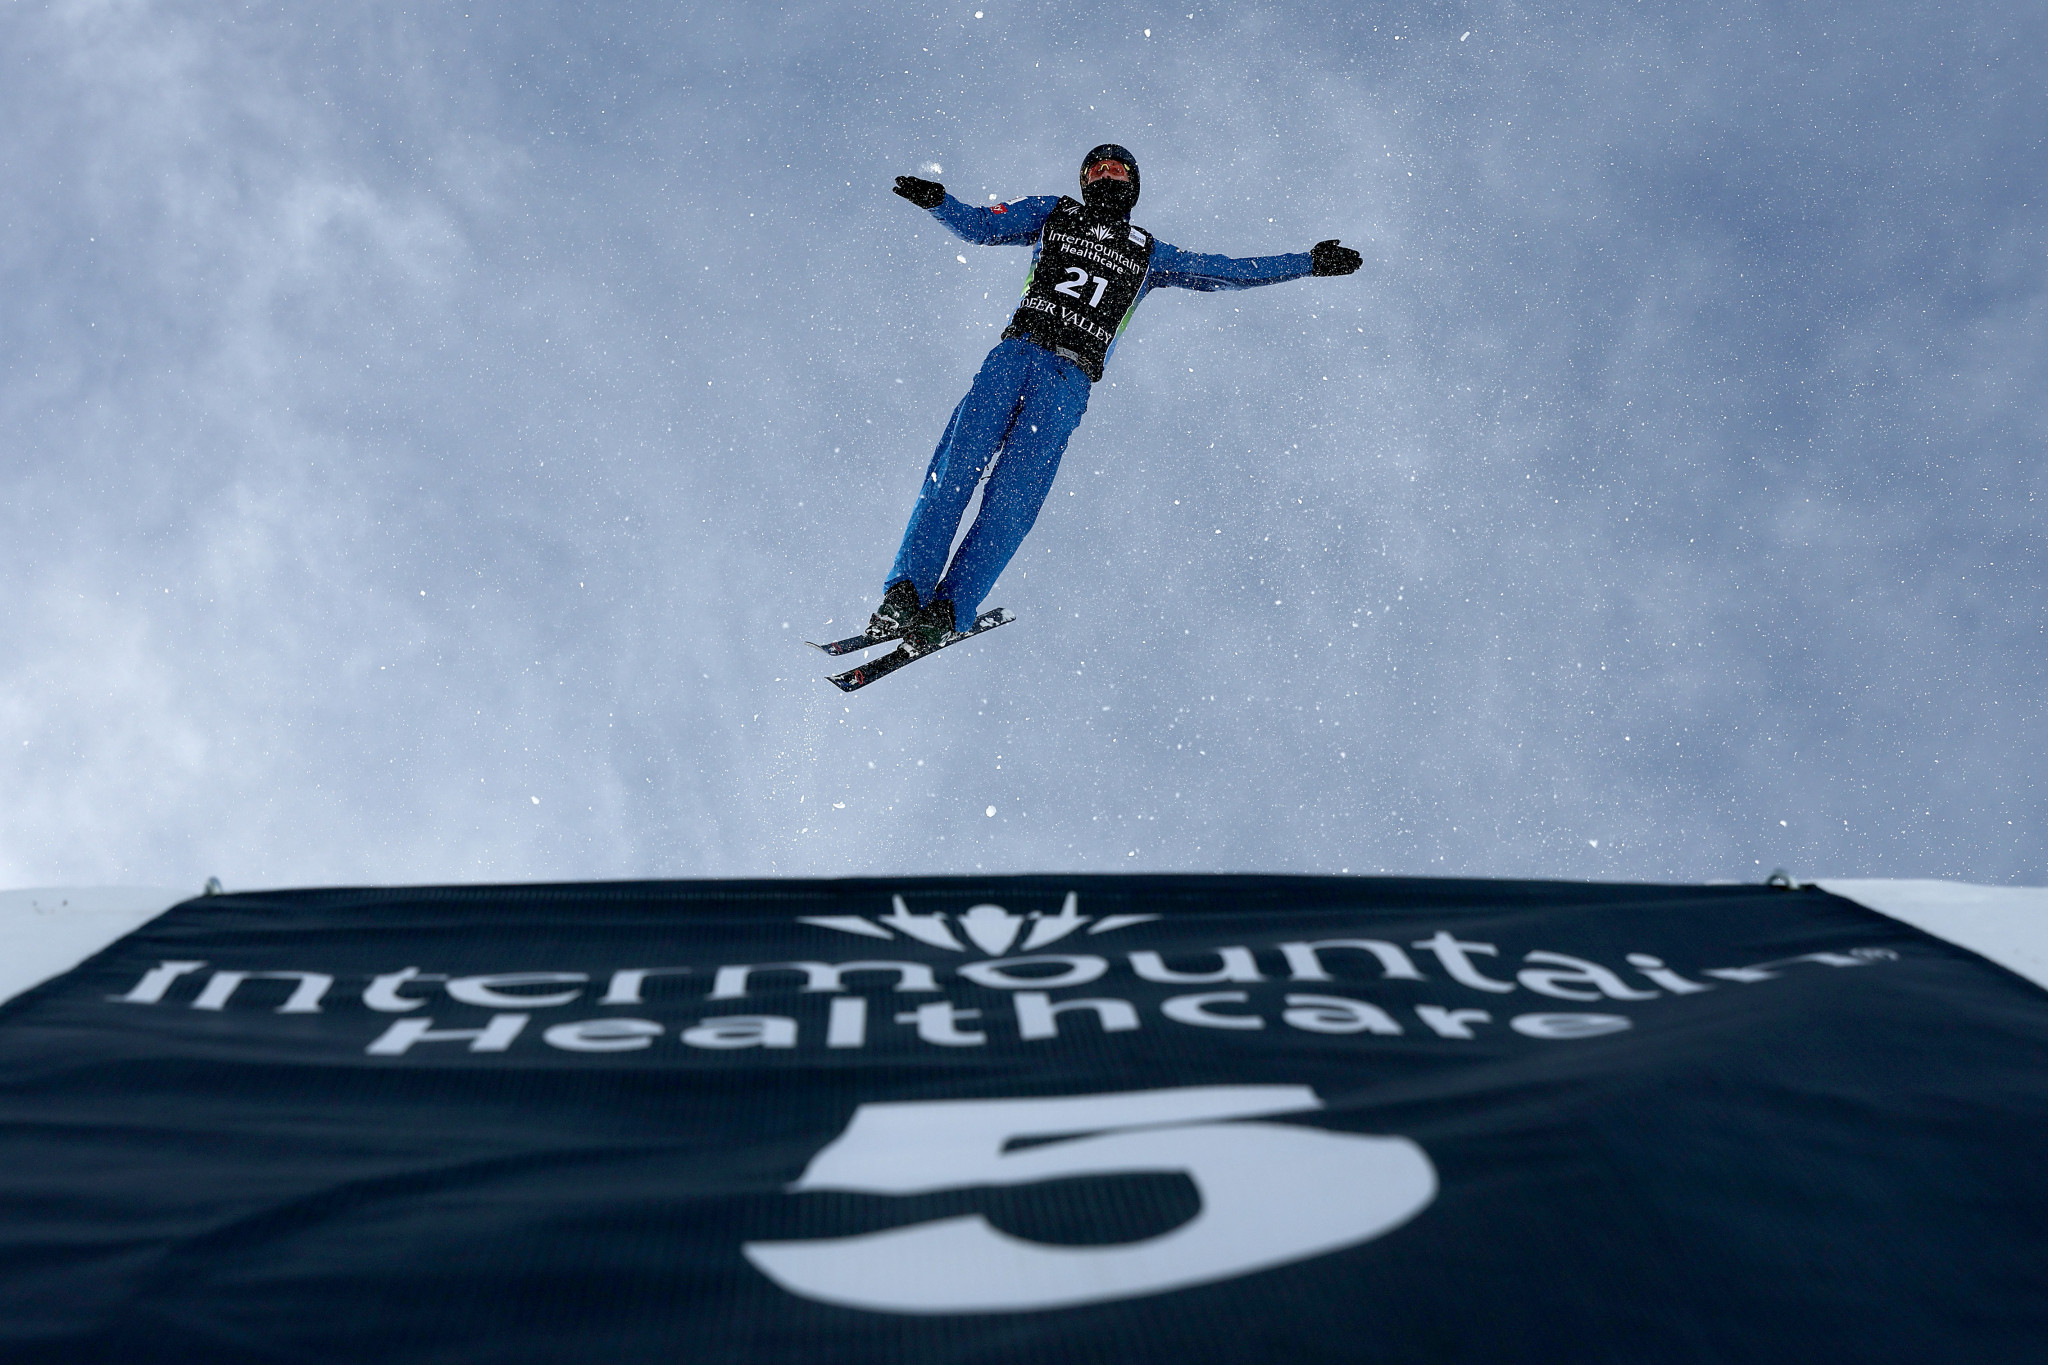 Quinn Dehlinger of the United States took victory in the men's aerials event at Le Relais, his first ever World Cup podium ©Getty Images  